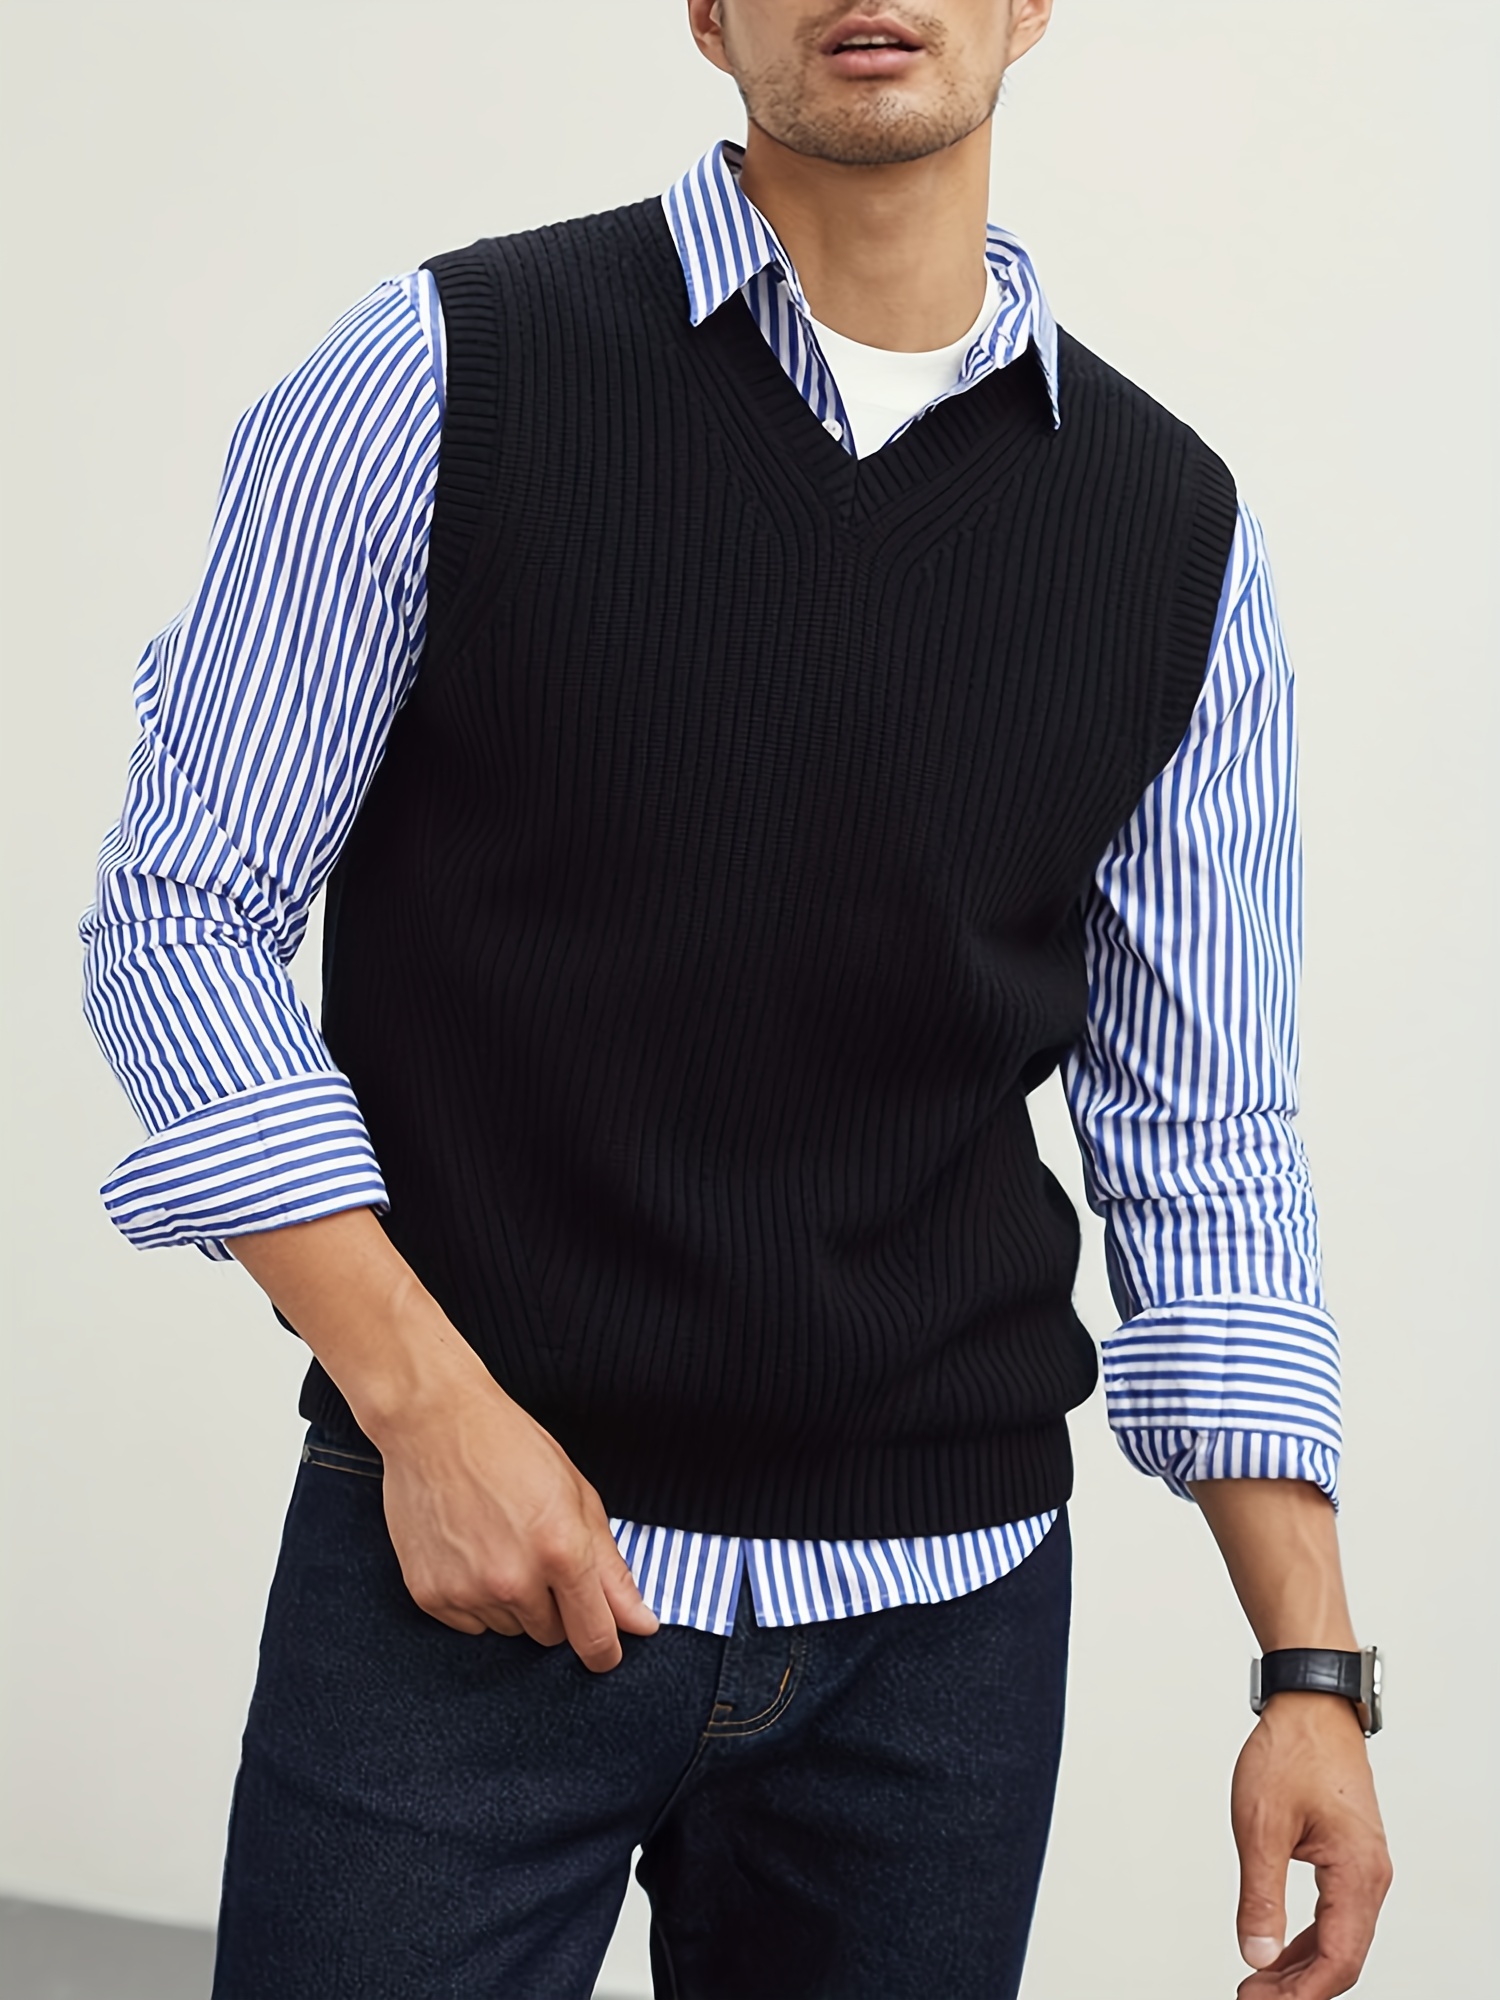 Solid V-neck Sleeveless Sweaters Vest + Shirt Two-piece Suit